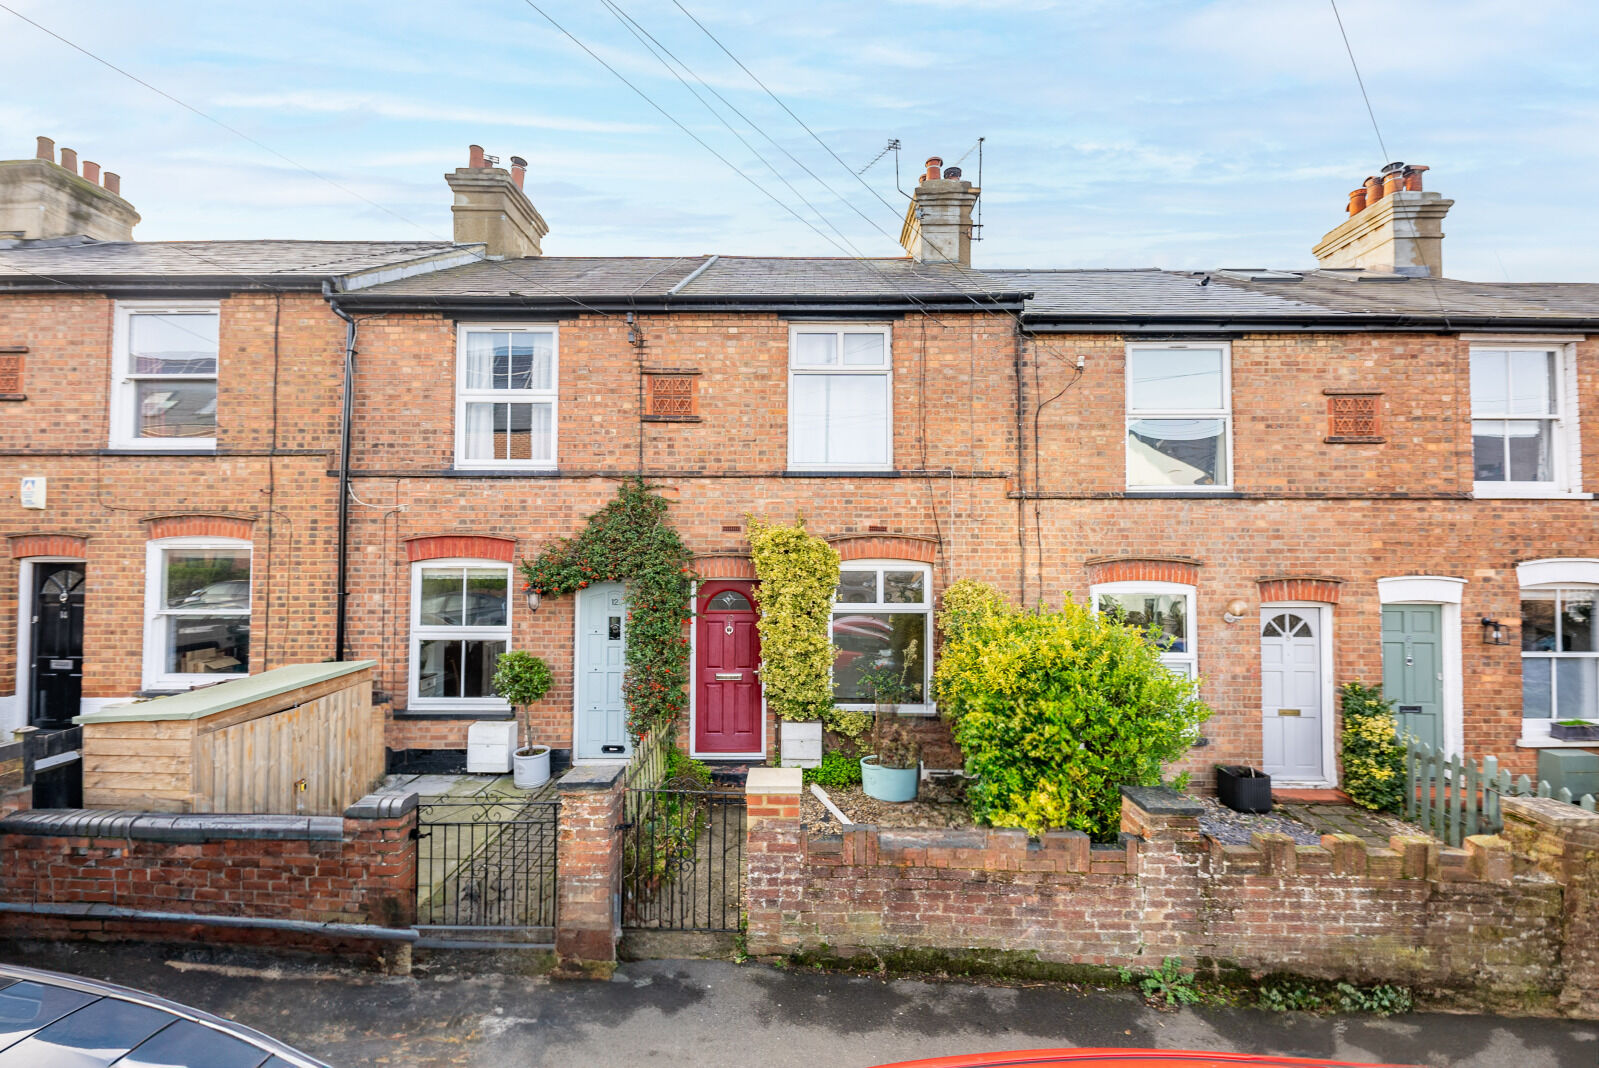 2 bedroom mid terraced house for sale Hedley Road, St. Albans, AL1, main image